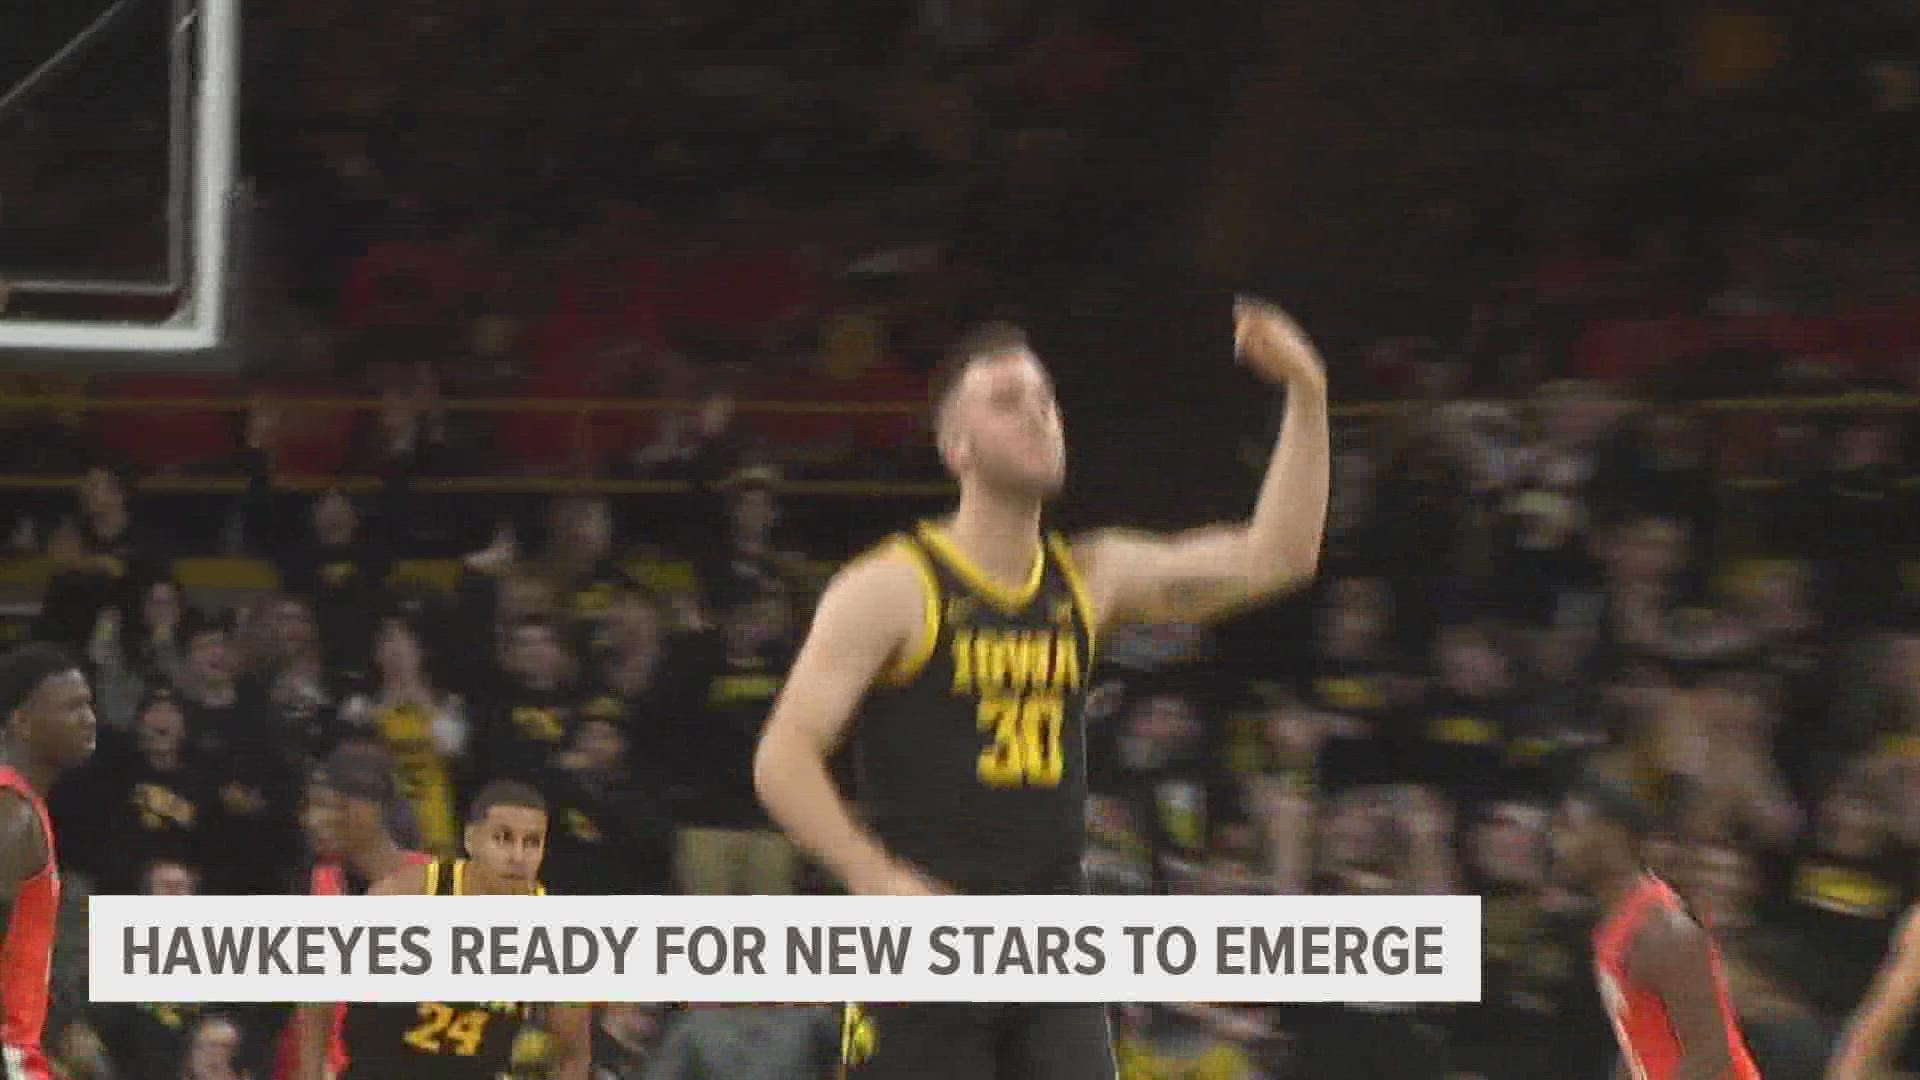 It's hard to make up for the loss of two star players like Keegan Murray and Jordan Bohannon, but that's exactly what the Hawkeyes will have to do this season.